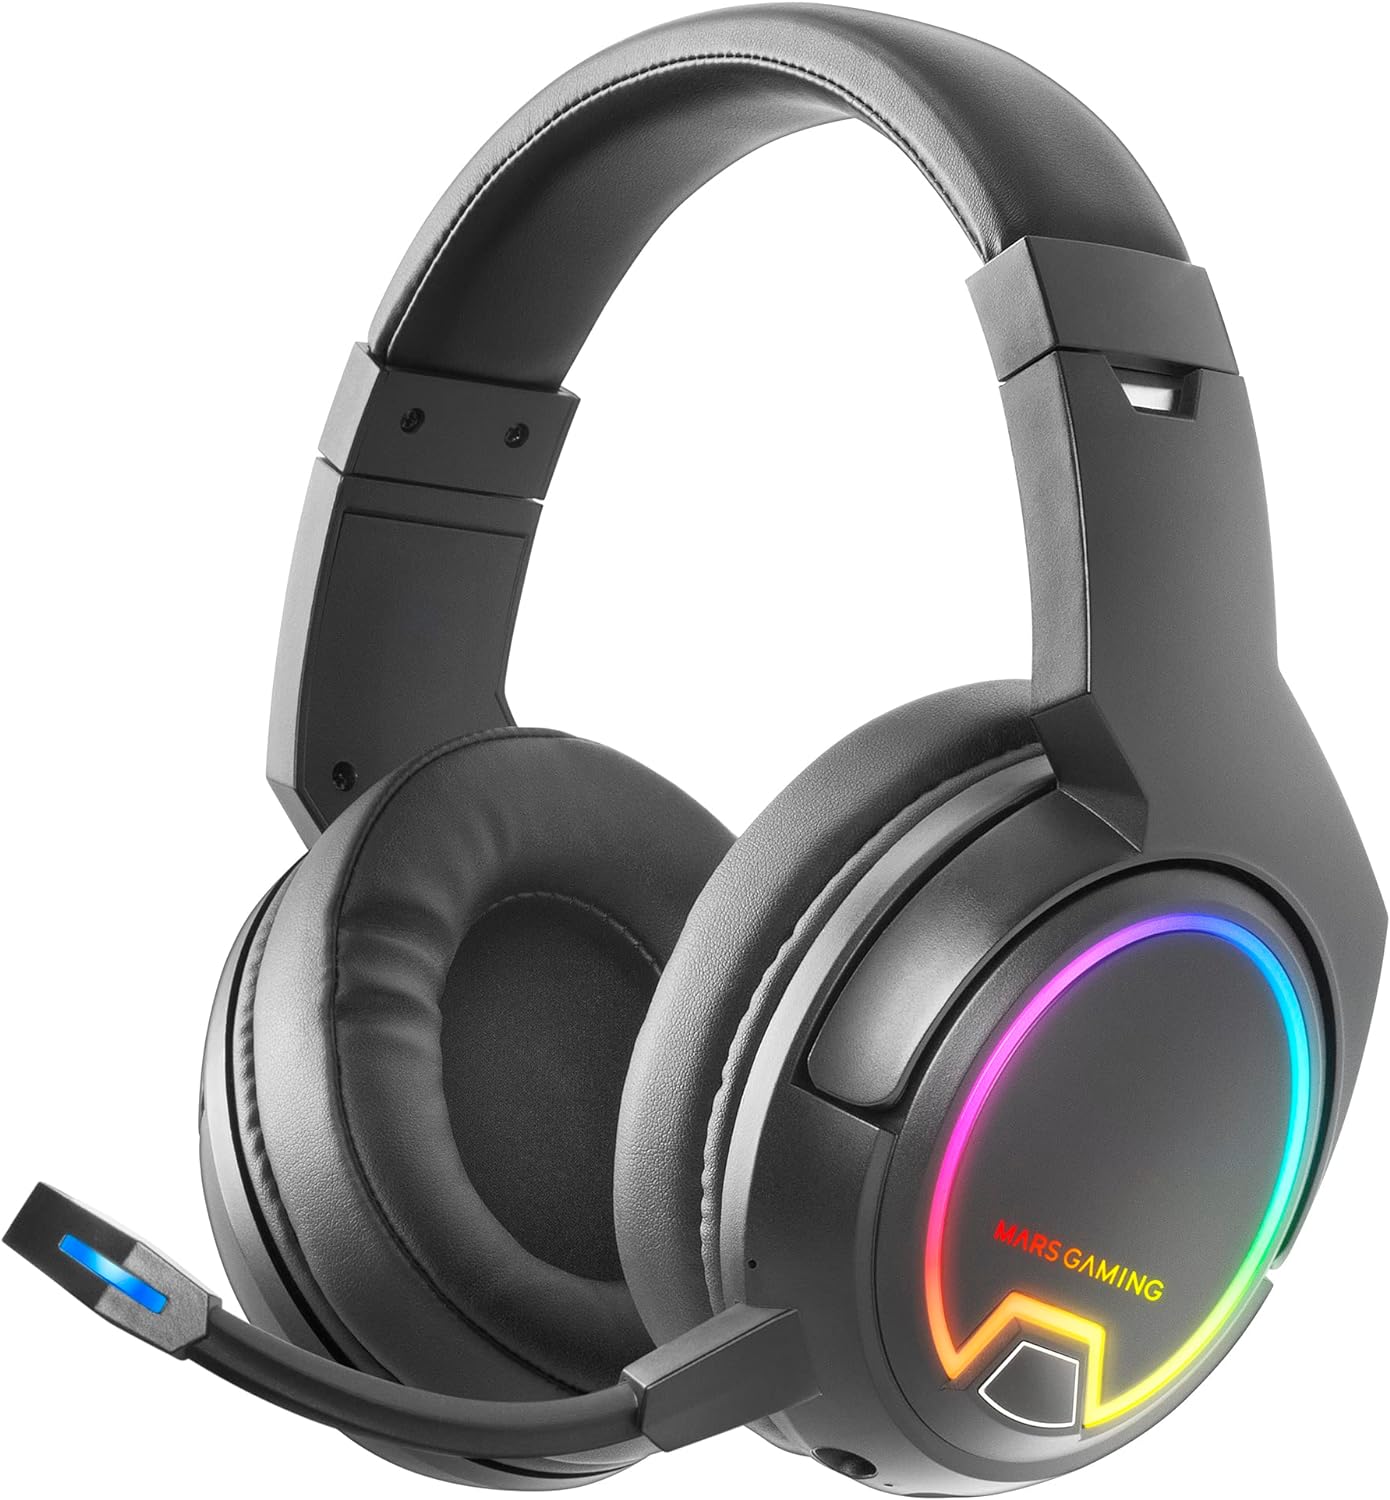 Mars Gaming MHW-100 Auriculares Inalámbricos